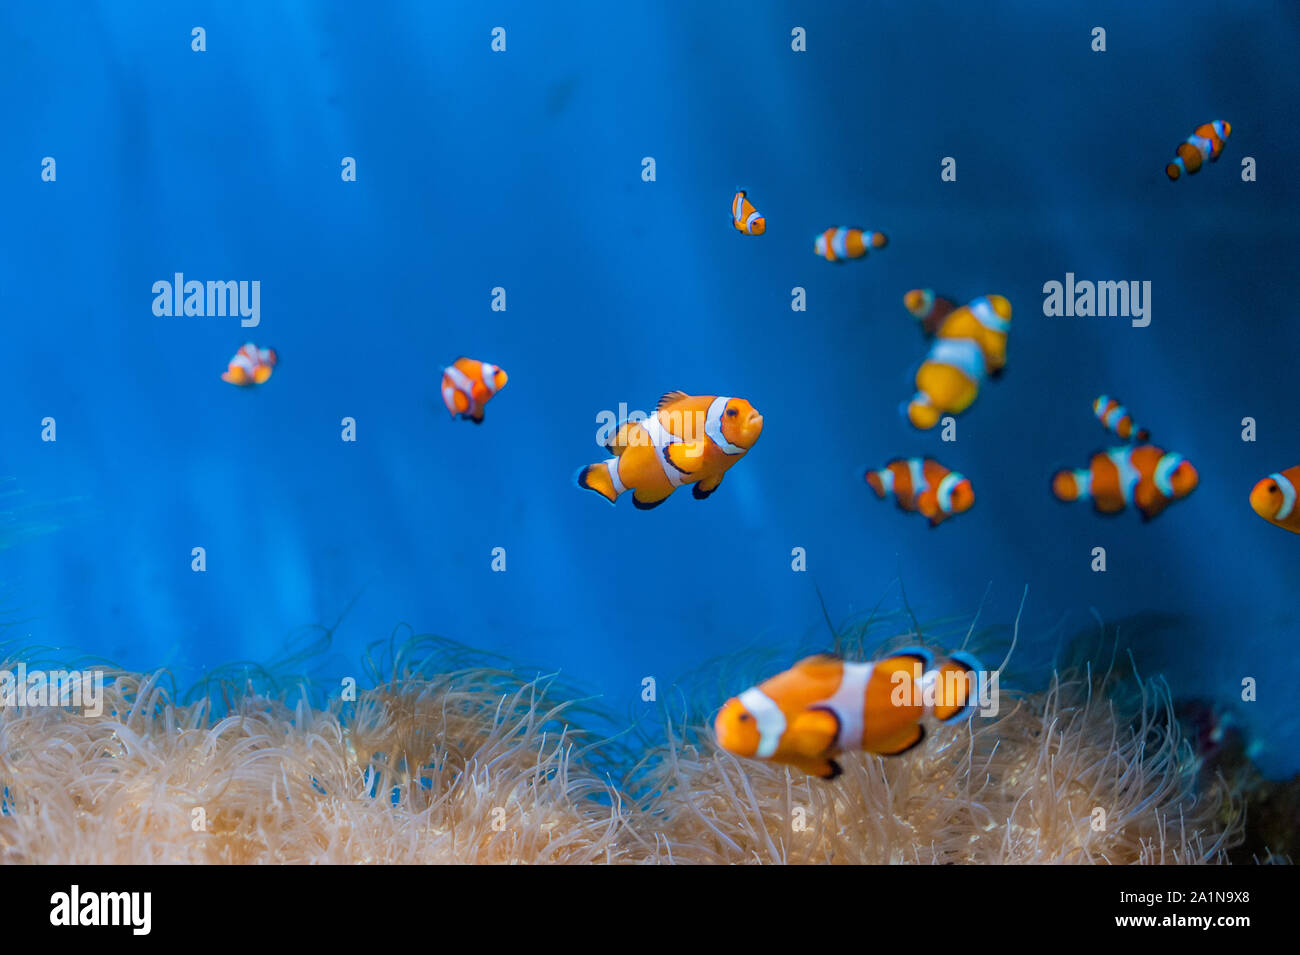 Clown fish and anemones on a blue background Stock Photo